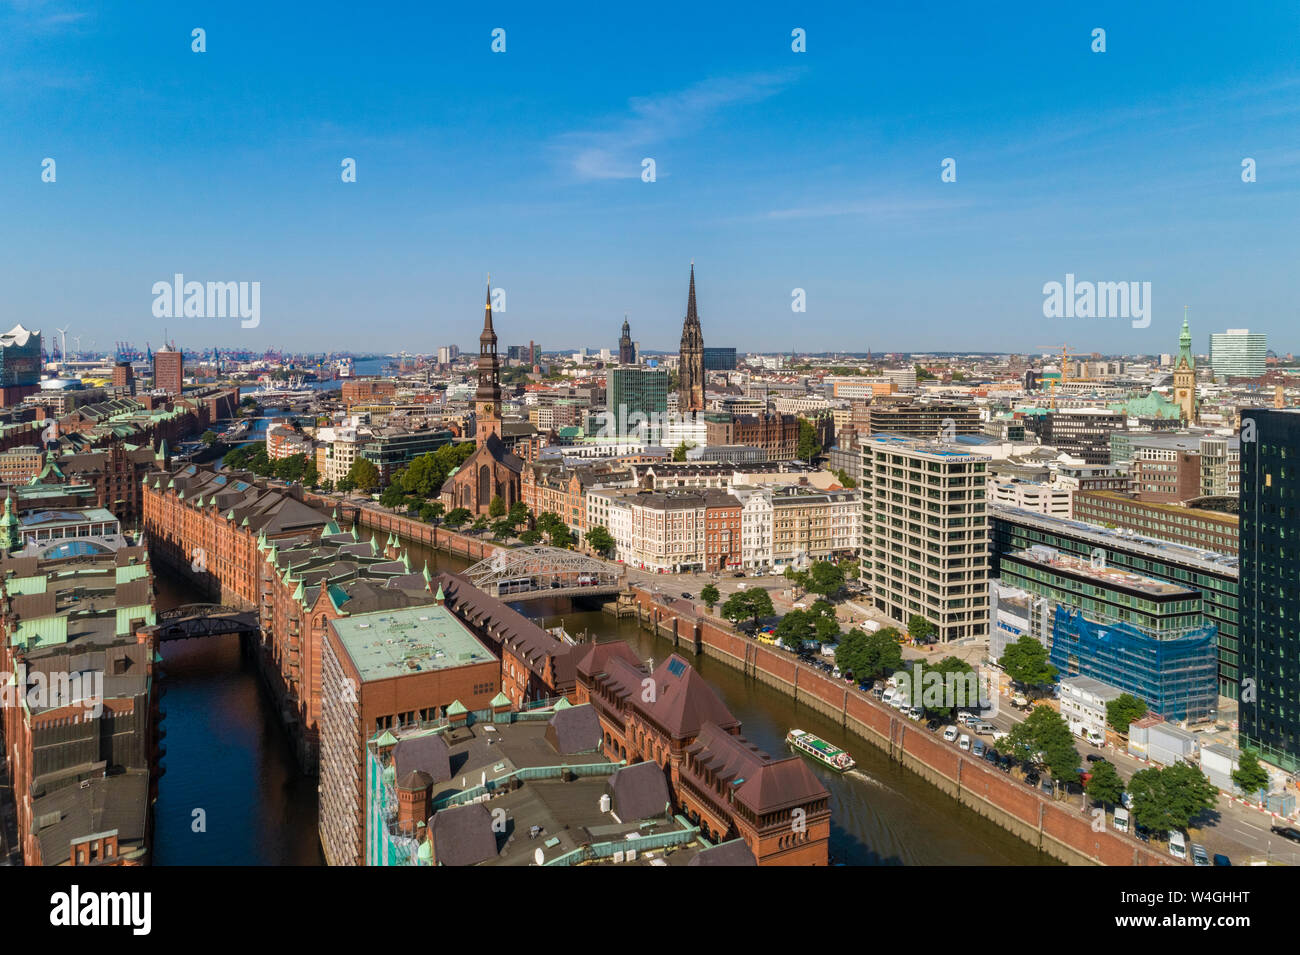 Cityscape with old town and new town, Hamburg, Germany Stock Photo